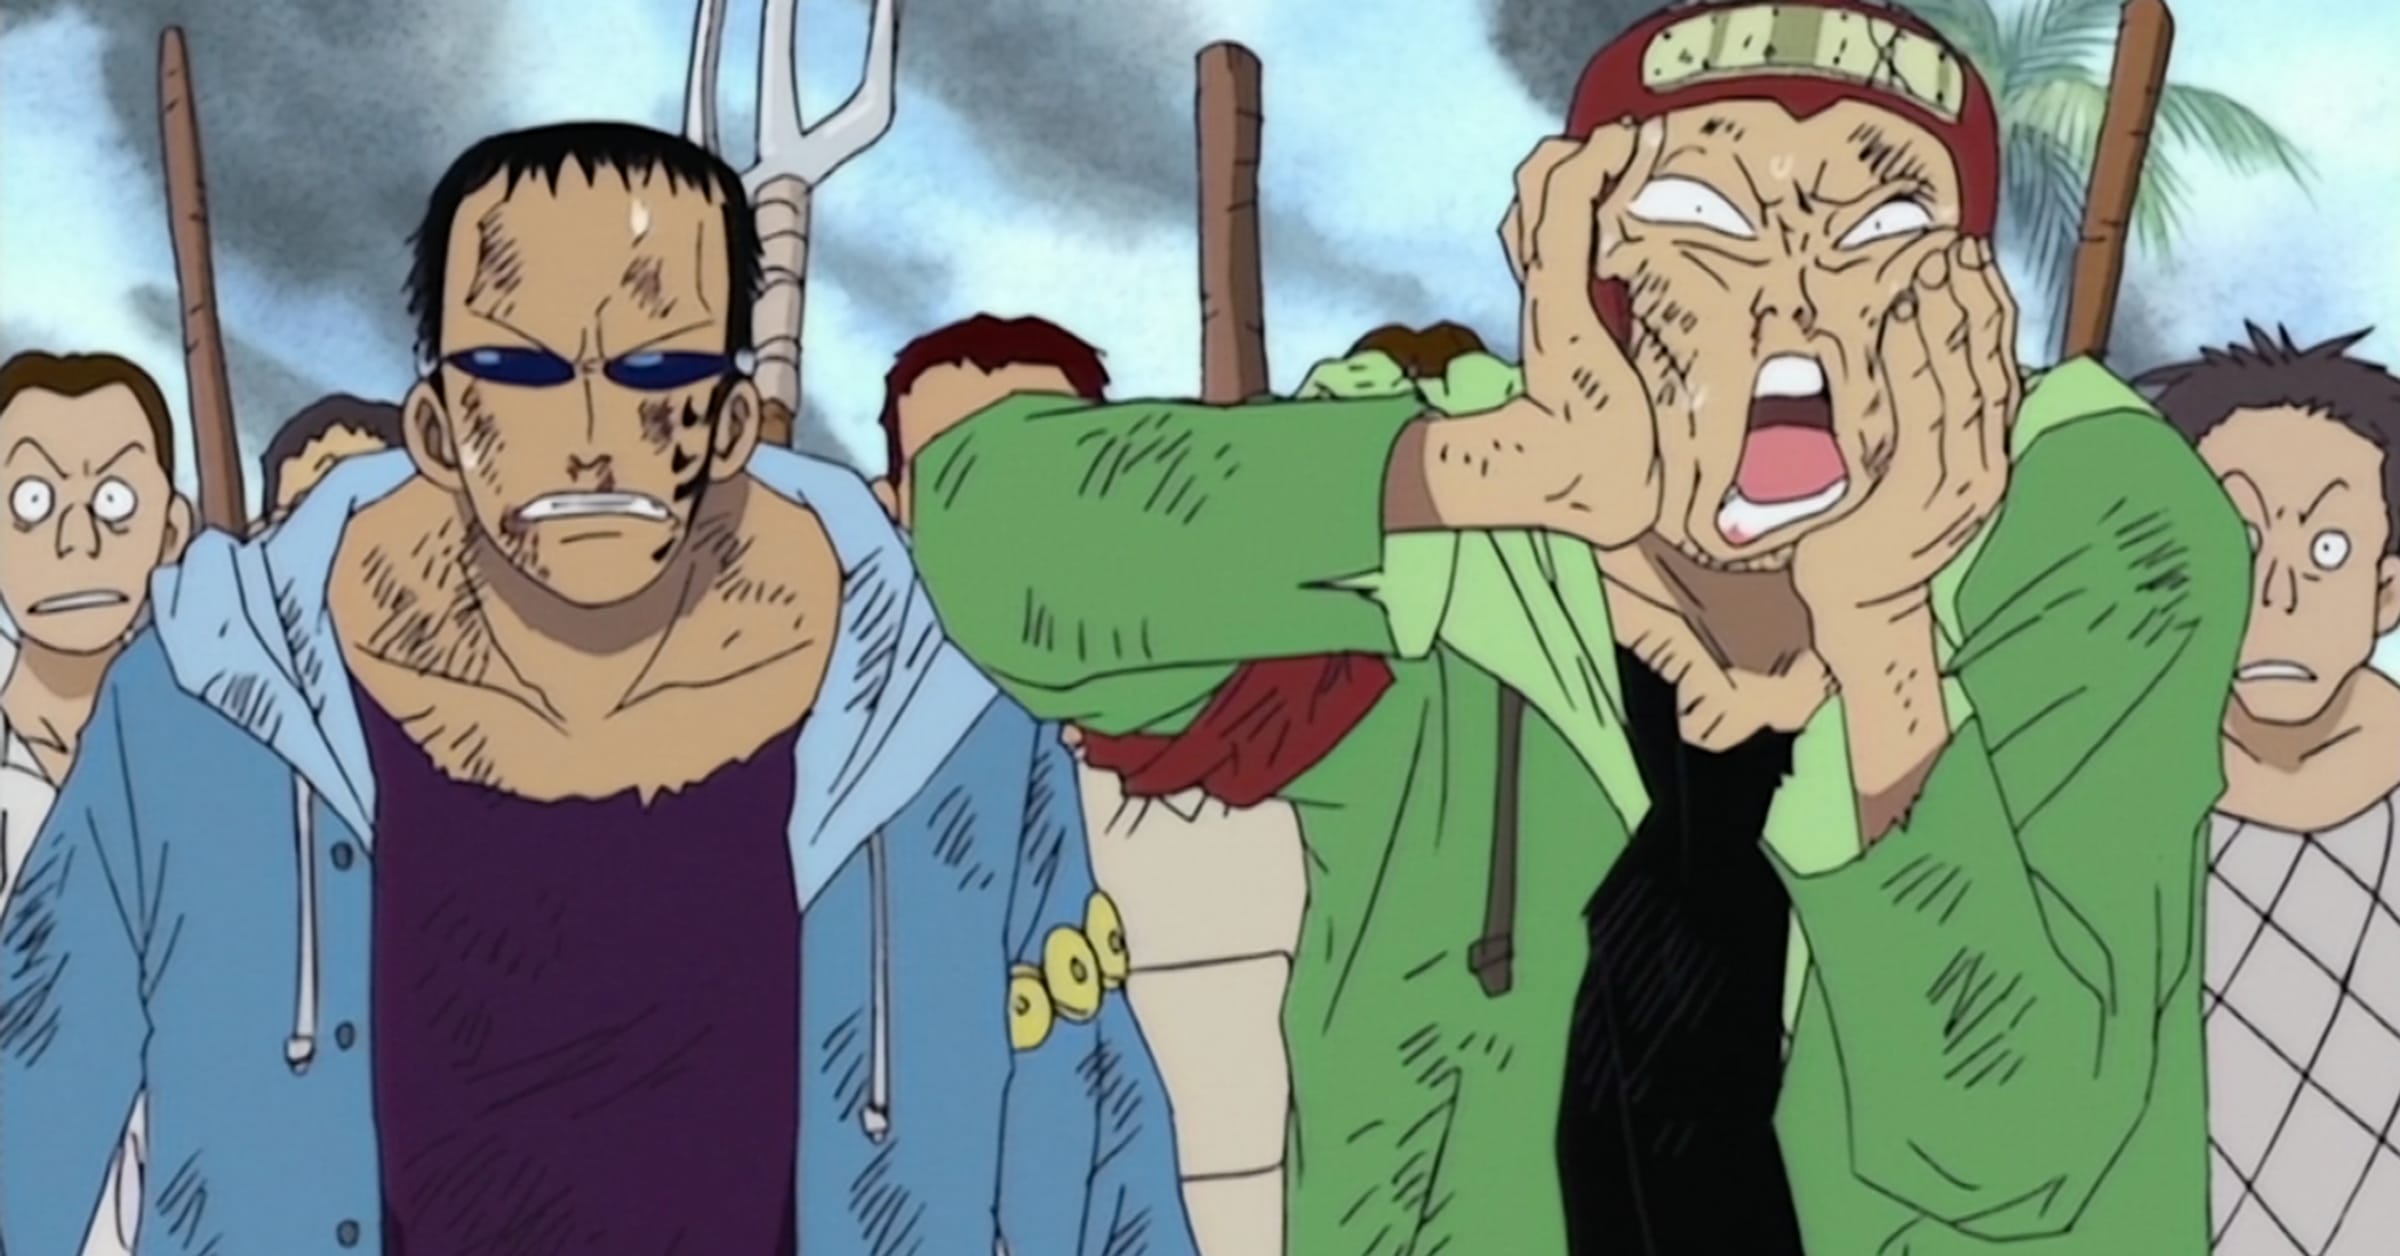 10 'One Piece' Anime Characters Too Impossible for the Live-Action Series